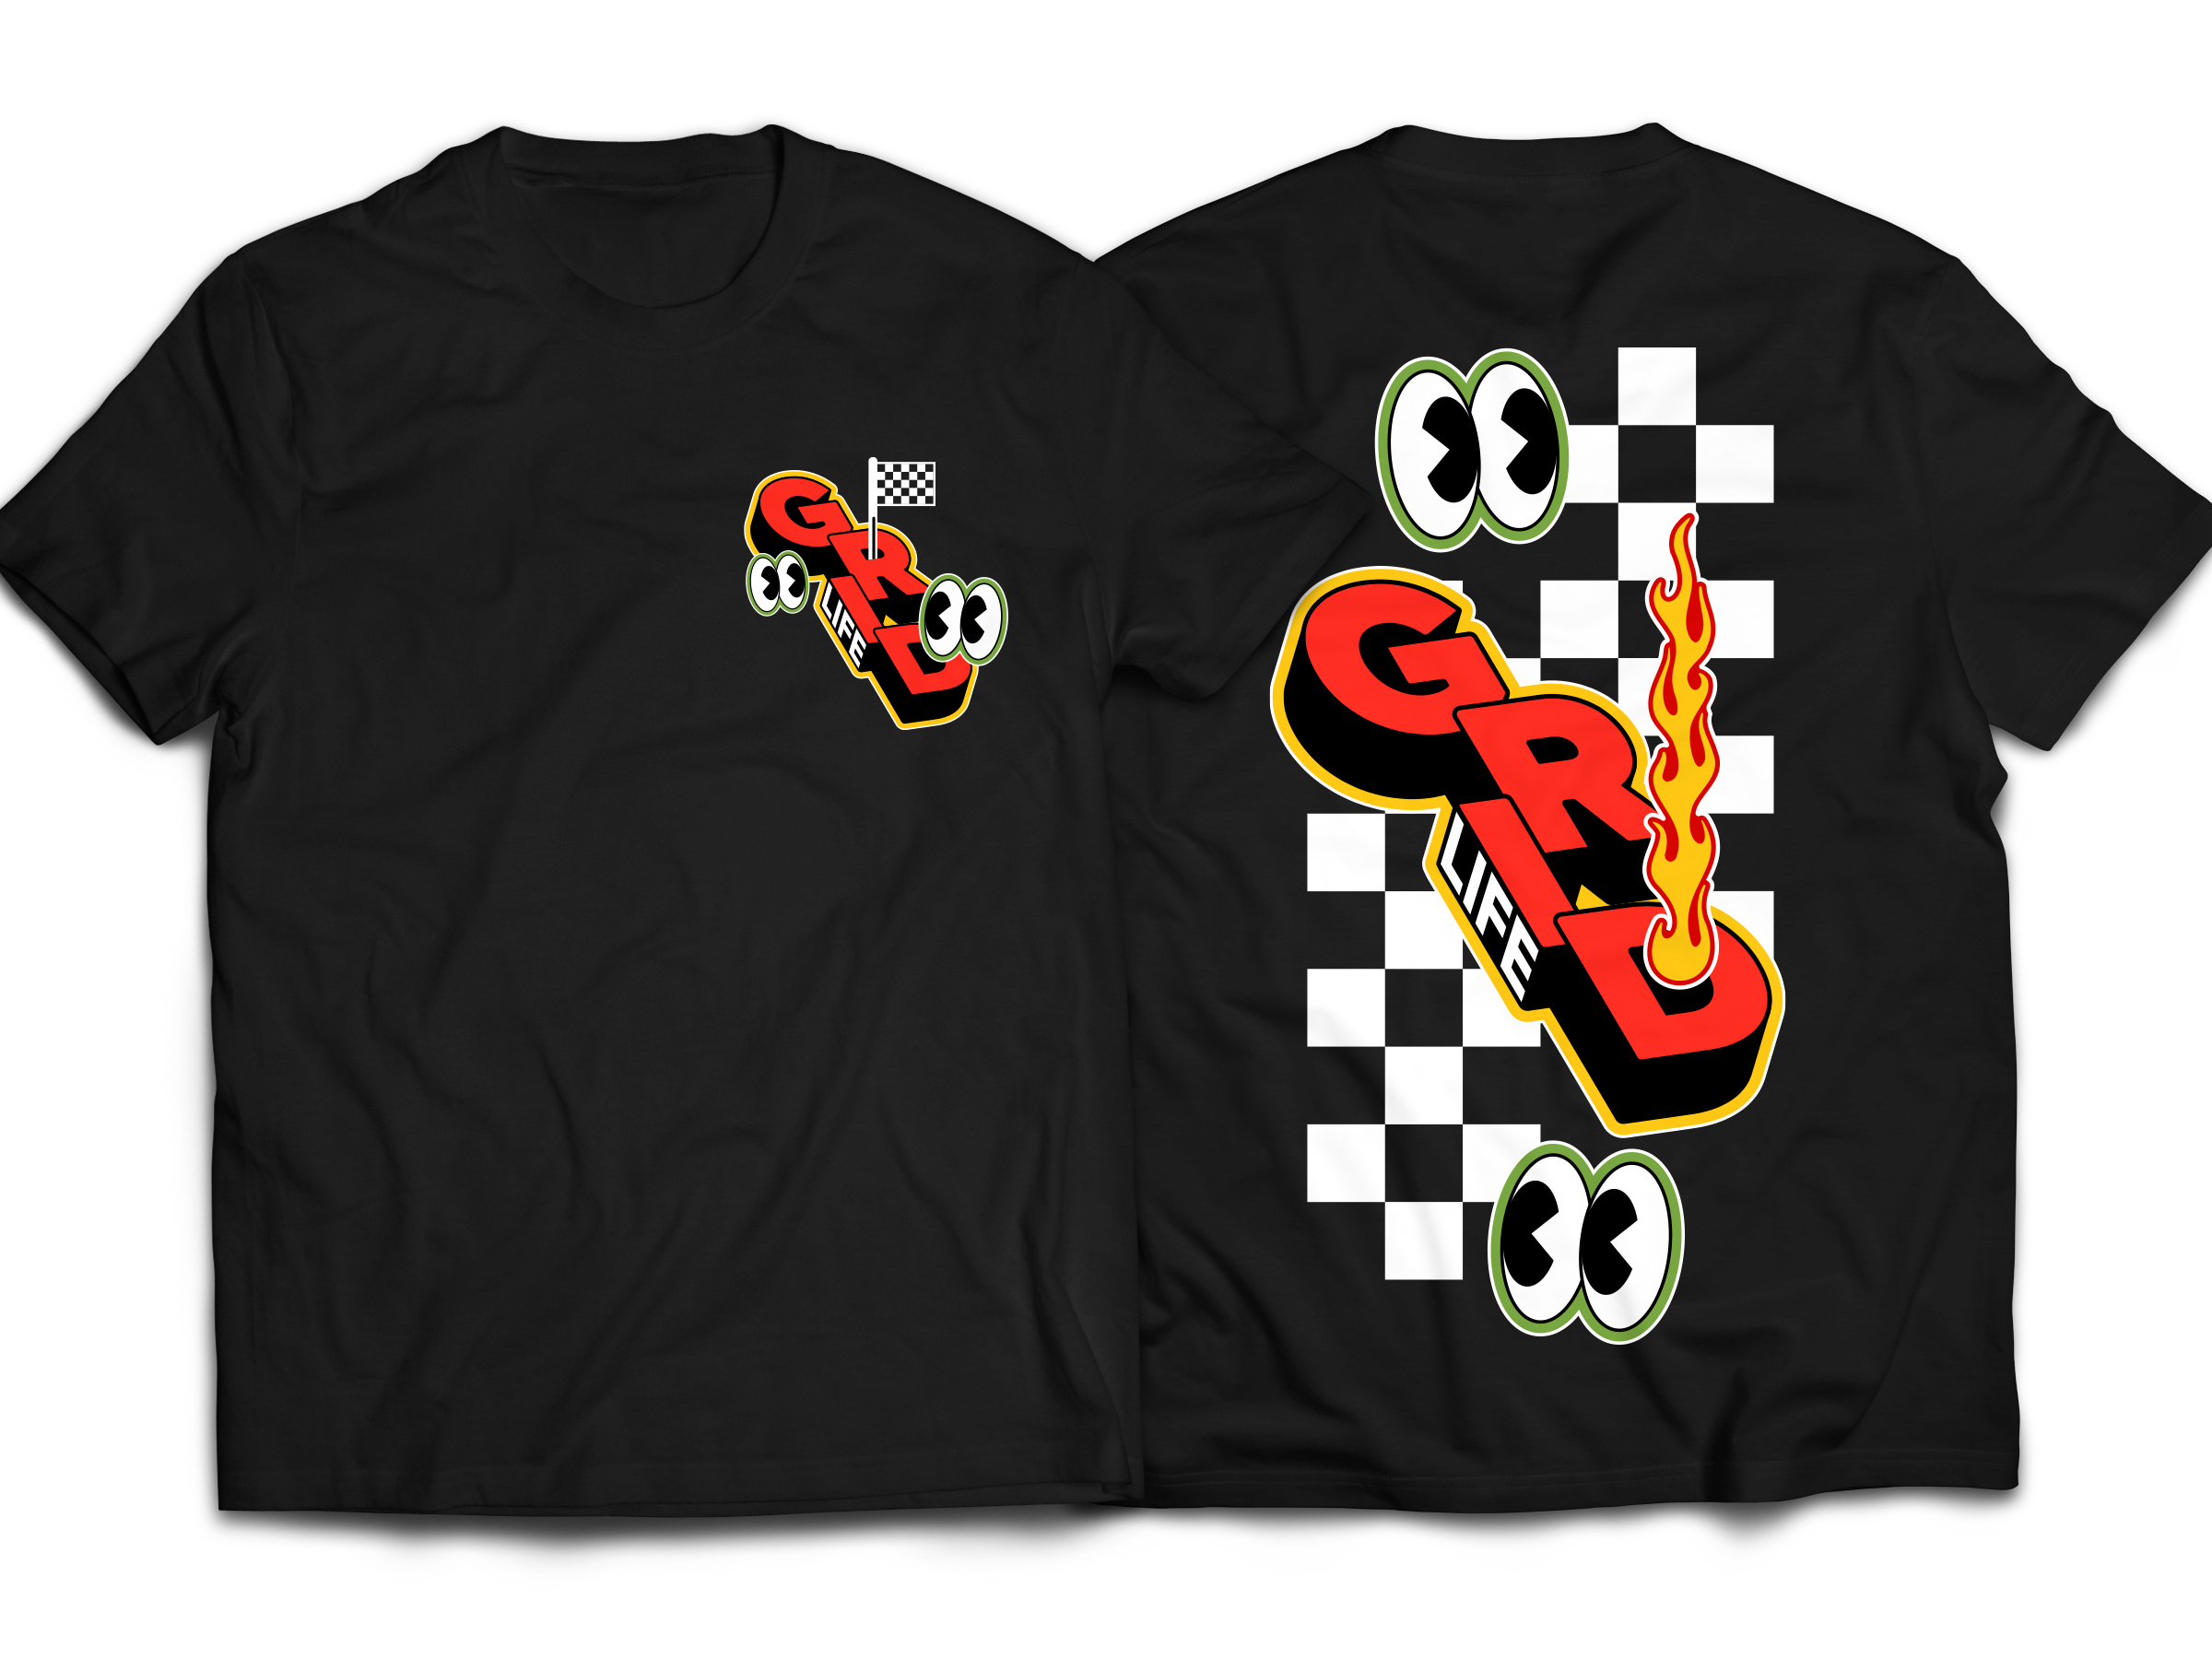 Black GRIDLIFE peekers t-shirt, showing front and back against white background. 